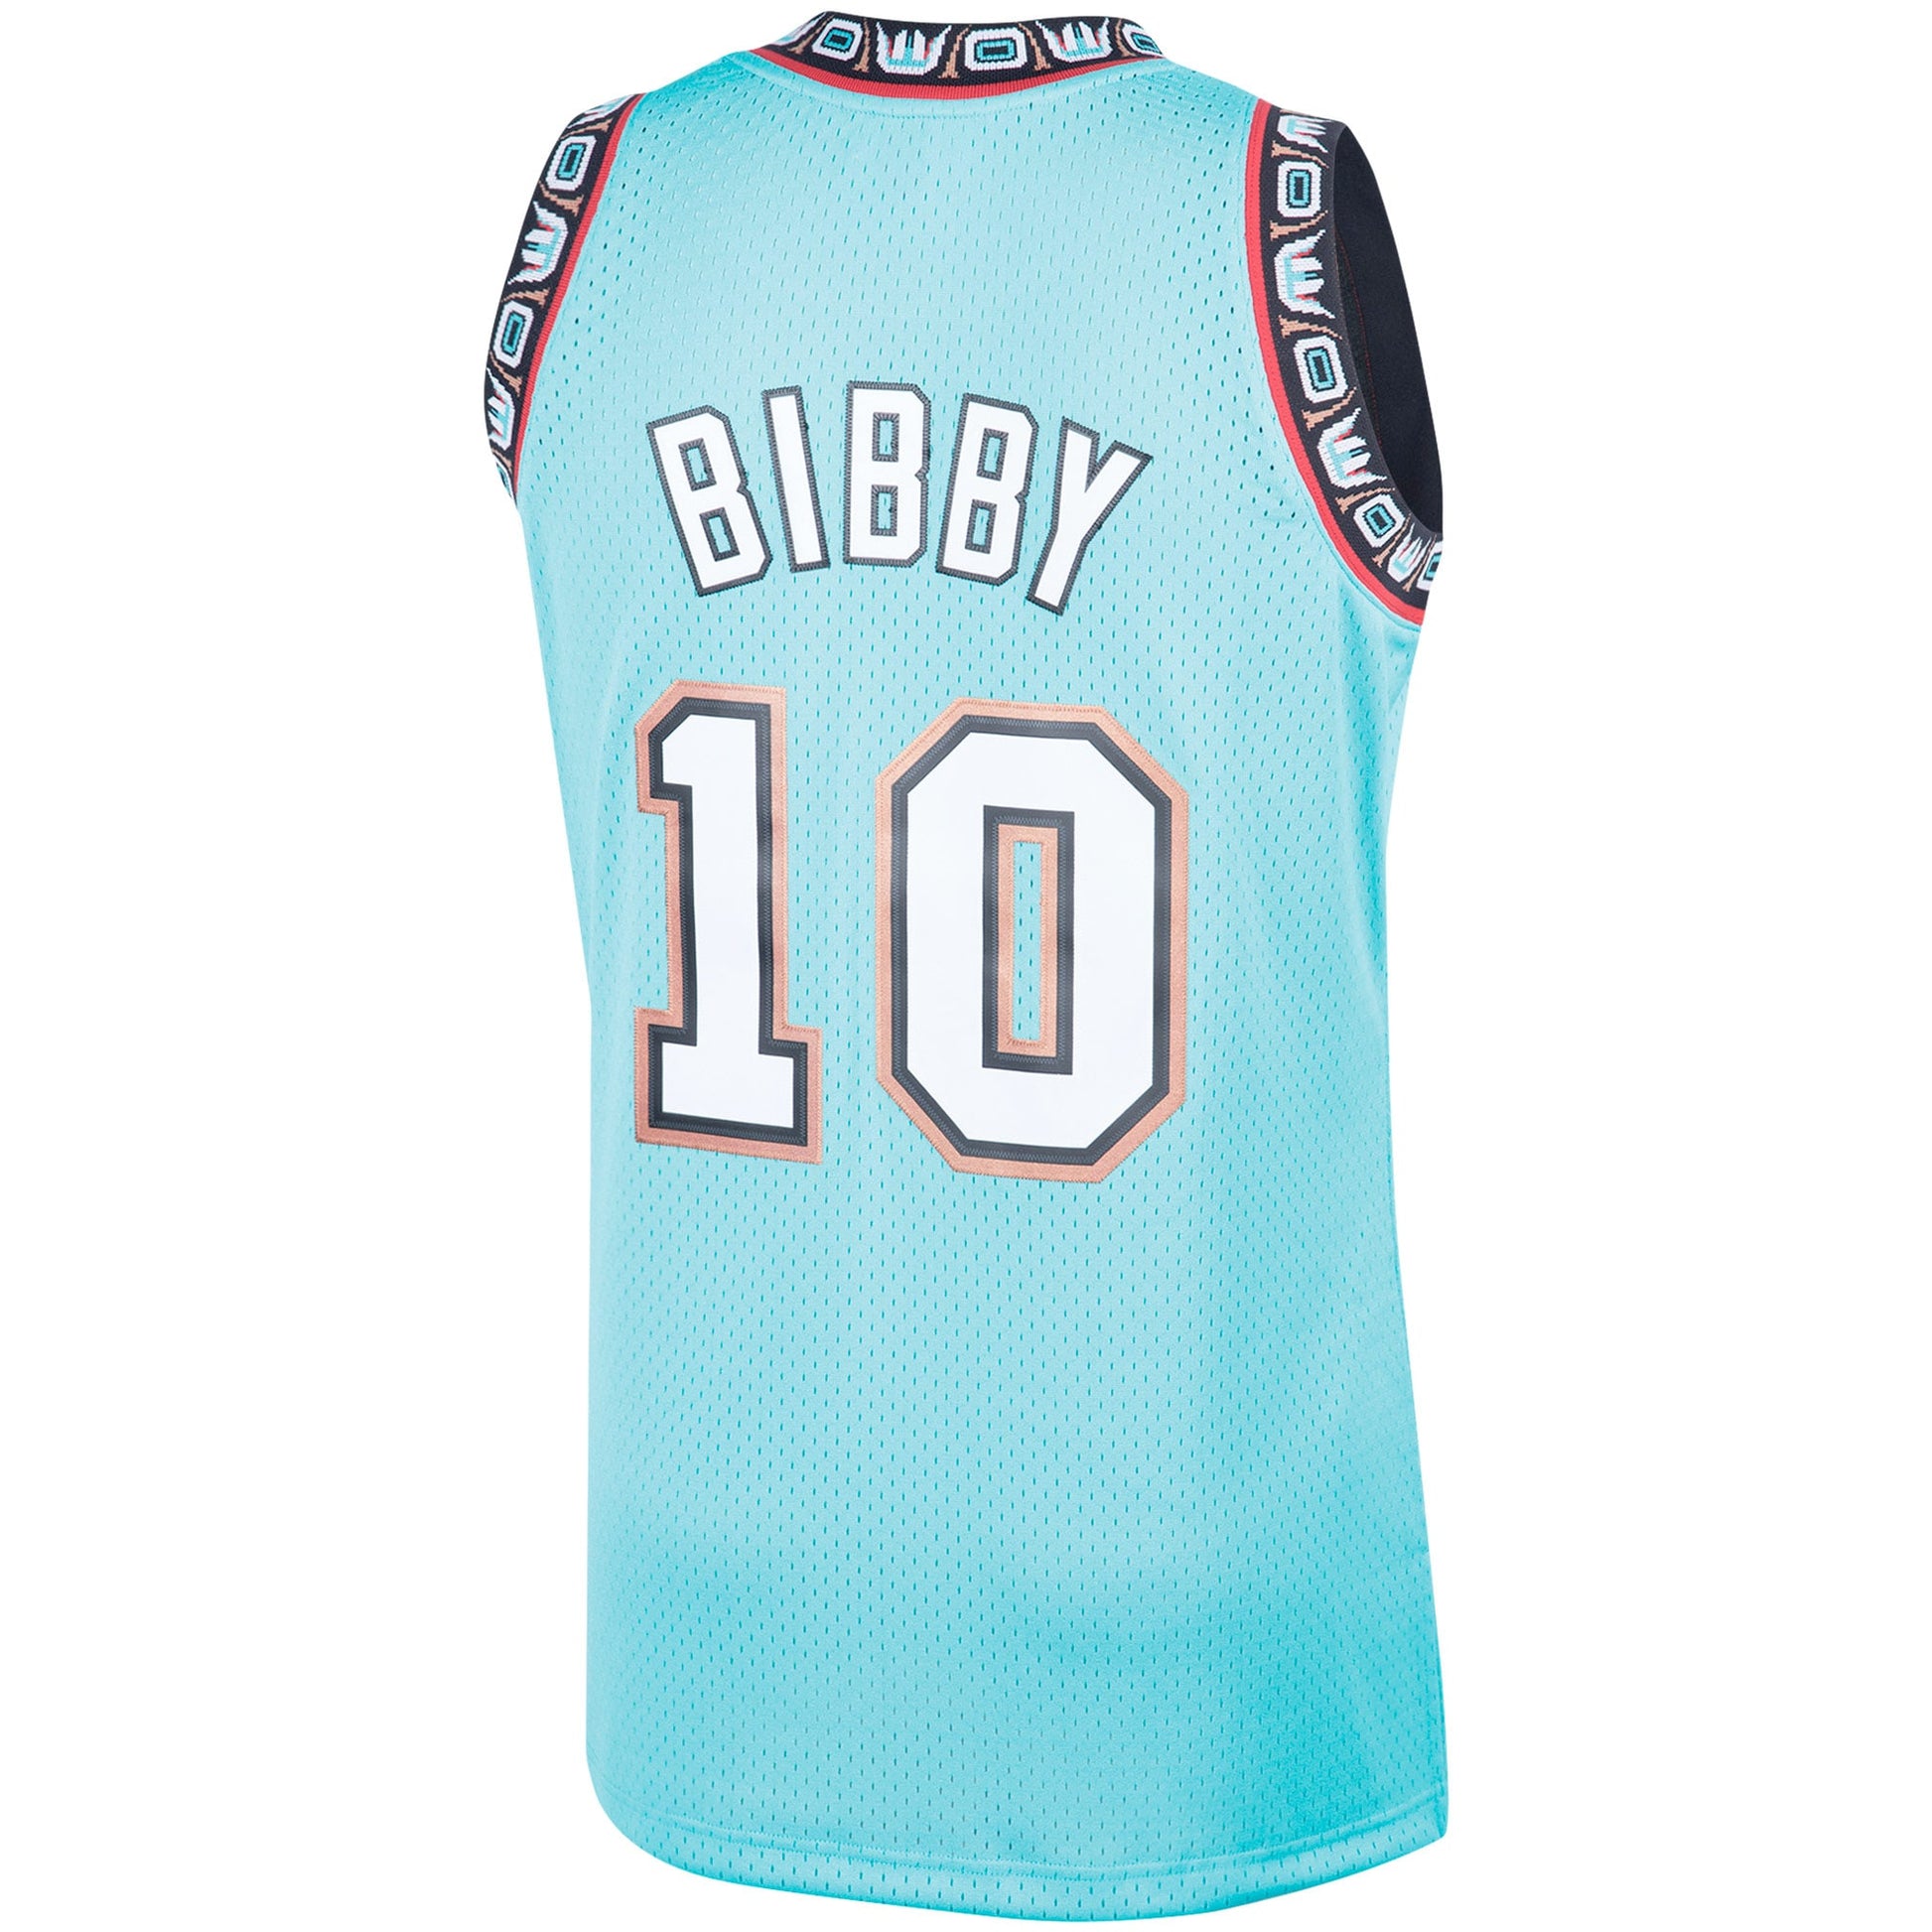  Swingman Jersey Vancouver Grizzlies Home 1998-99 Mike Bibby :  Sports & Outdoors